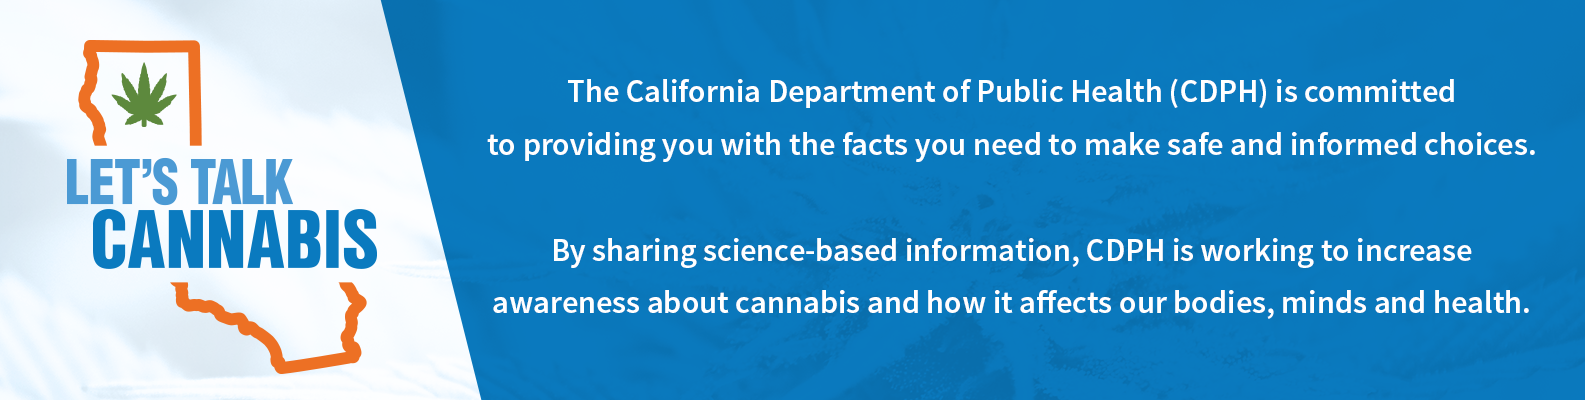 Let&#39;s Talk Cannabis Logo and text that reads: the California Department of Public Health (CDPH) is committed to providing you with the facts you need to make safe and informed choices. By sharing science-based information, CDPH is working to increase awareness about cannabis and how it affects our bodies, minds and health 